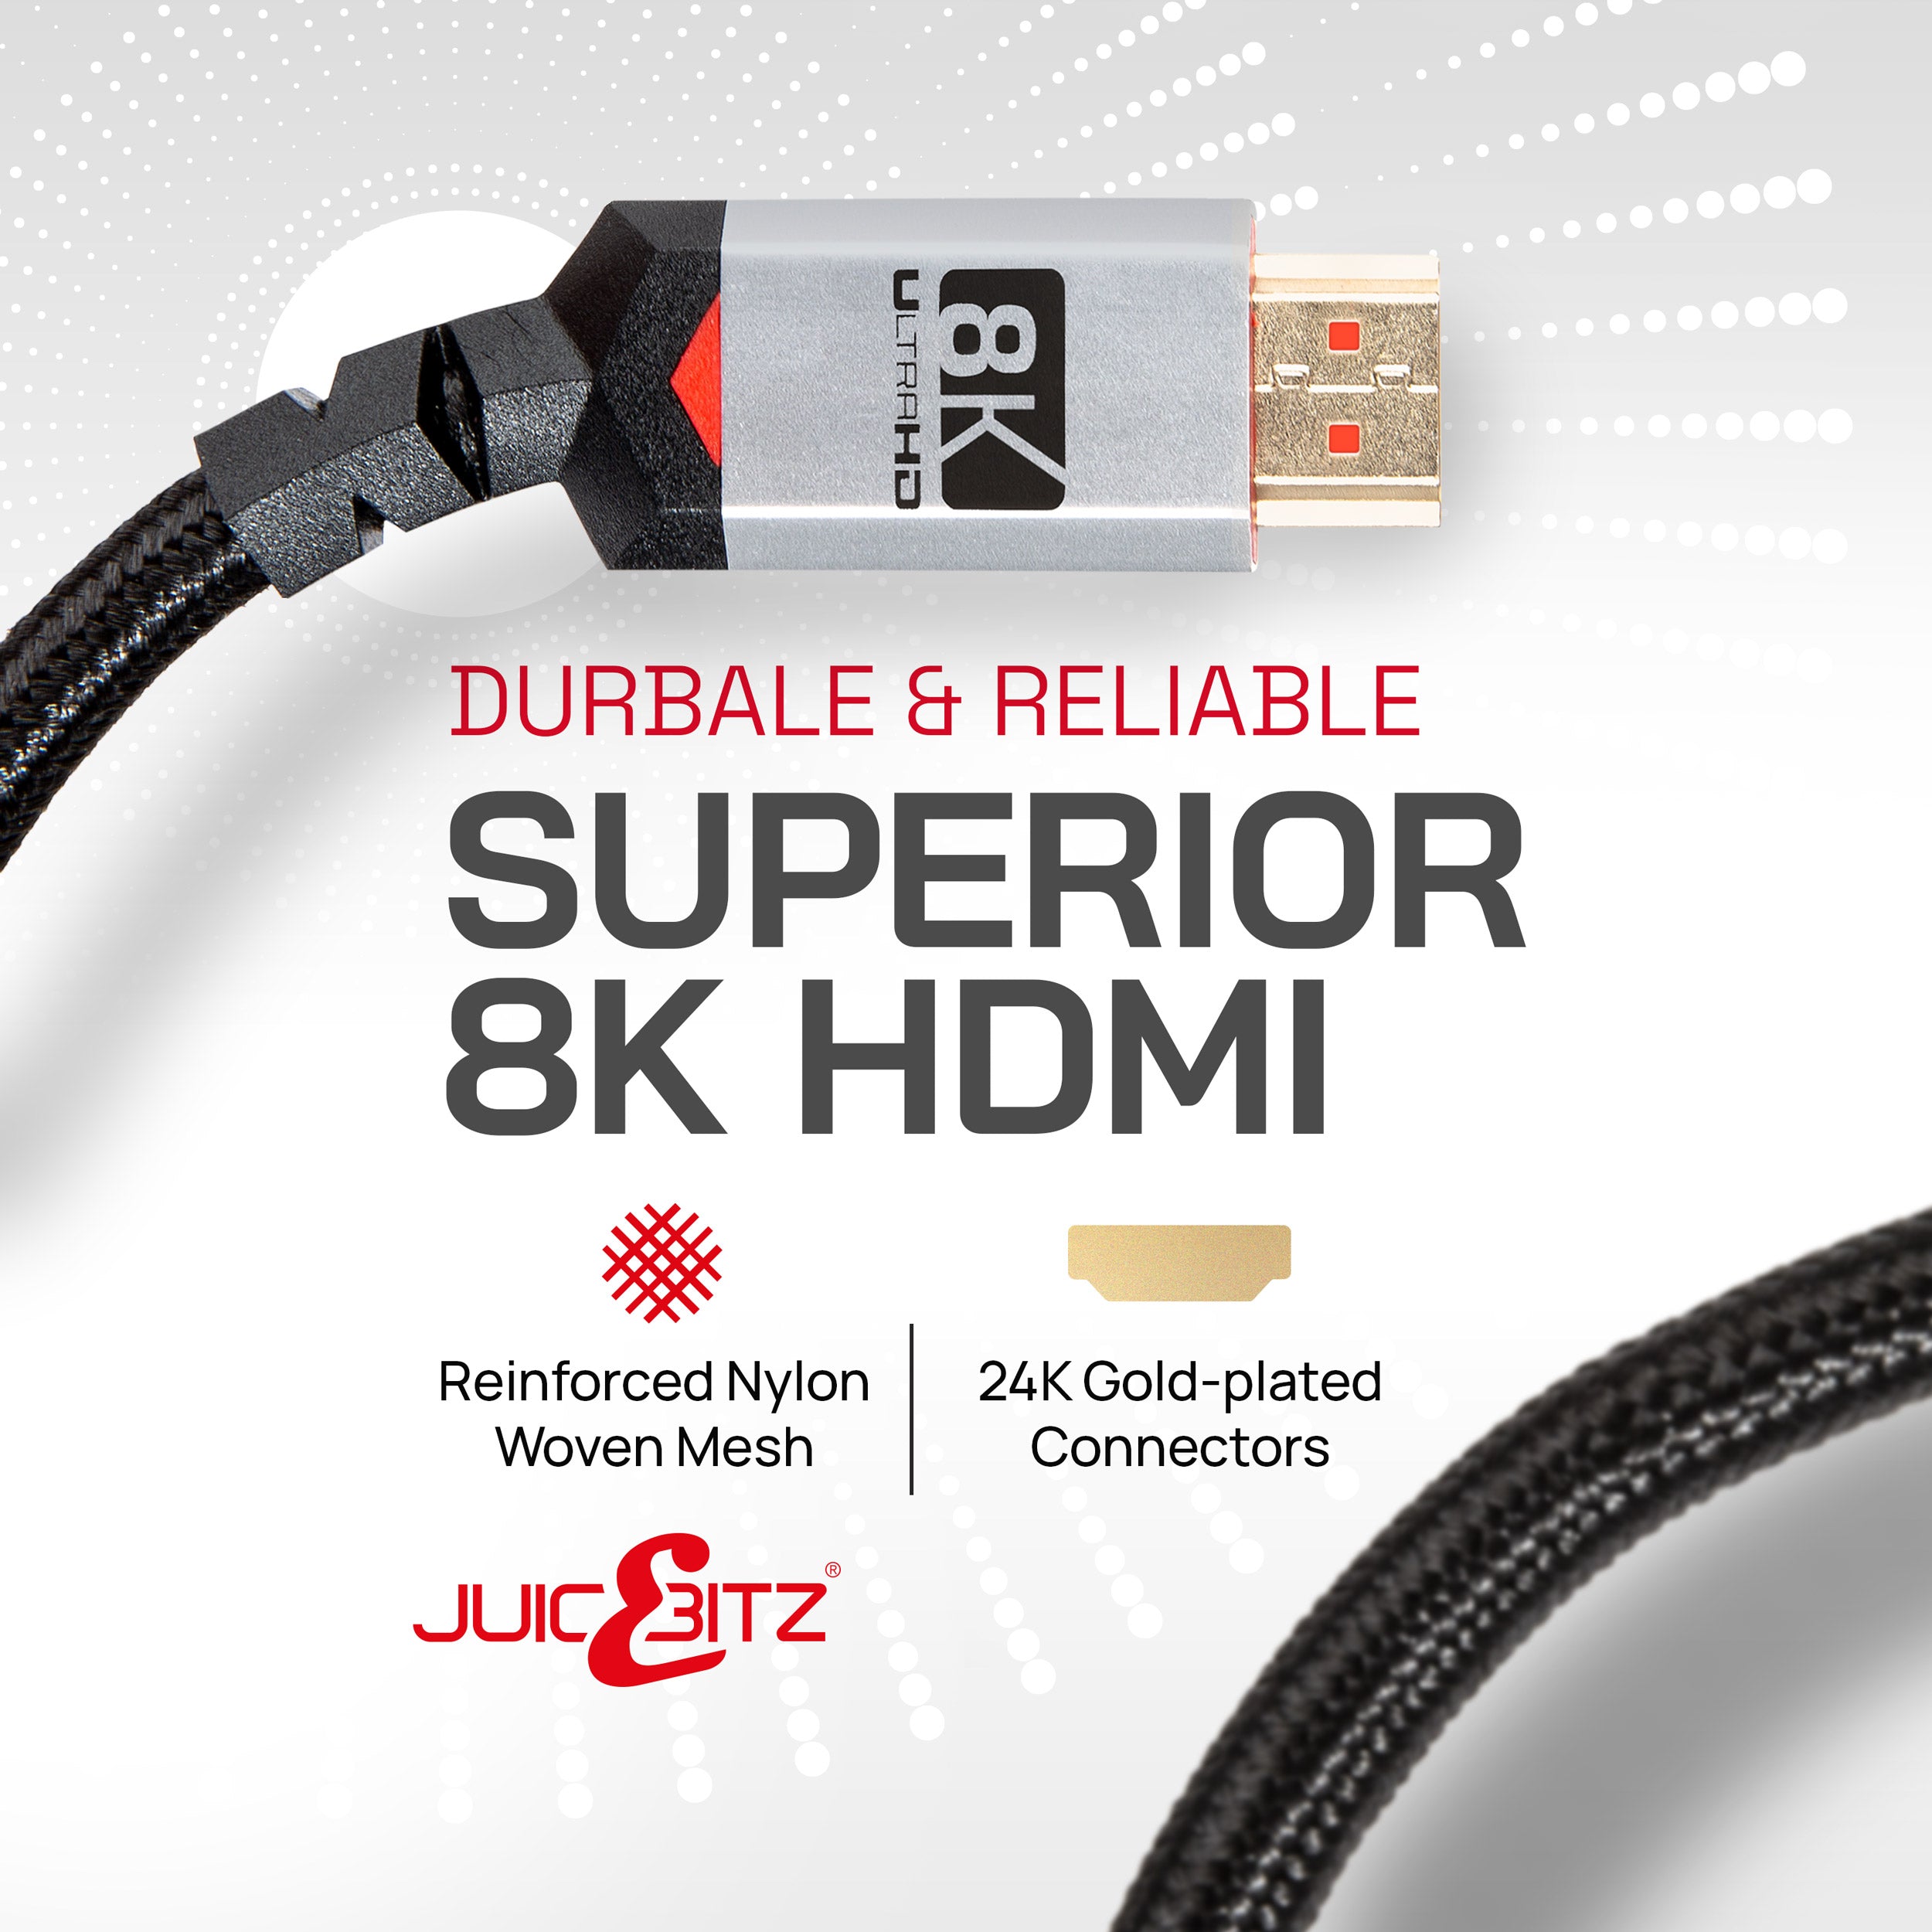 PRO Series 8k HDMI v2.1 Braided Cable UHD Ultra High Speed Lead 48Gbps 4320p 2160p 1080p HDR